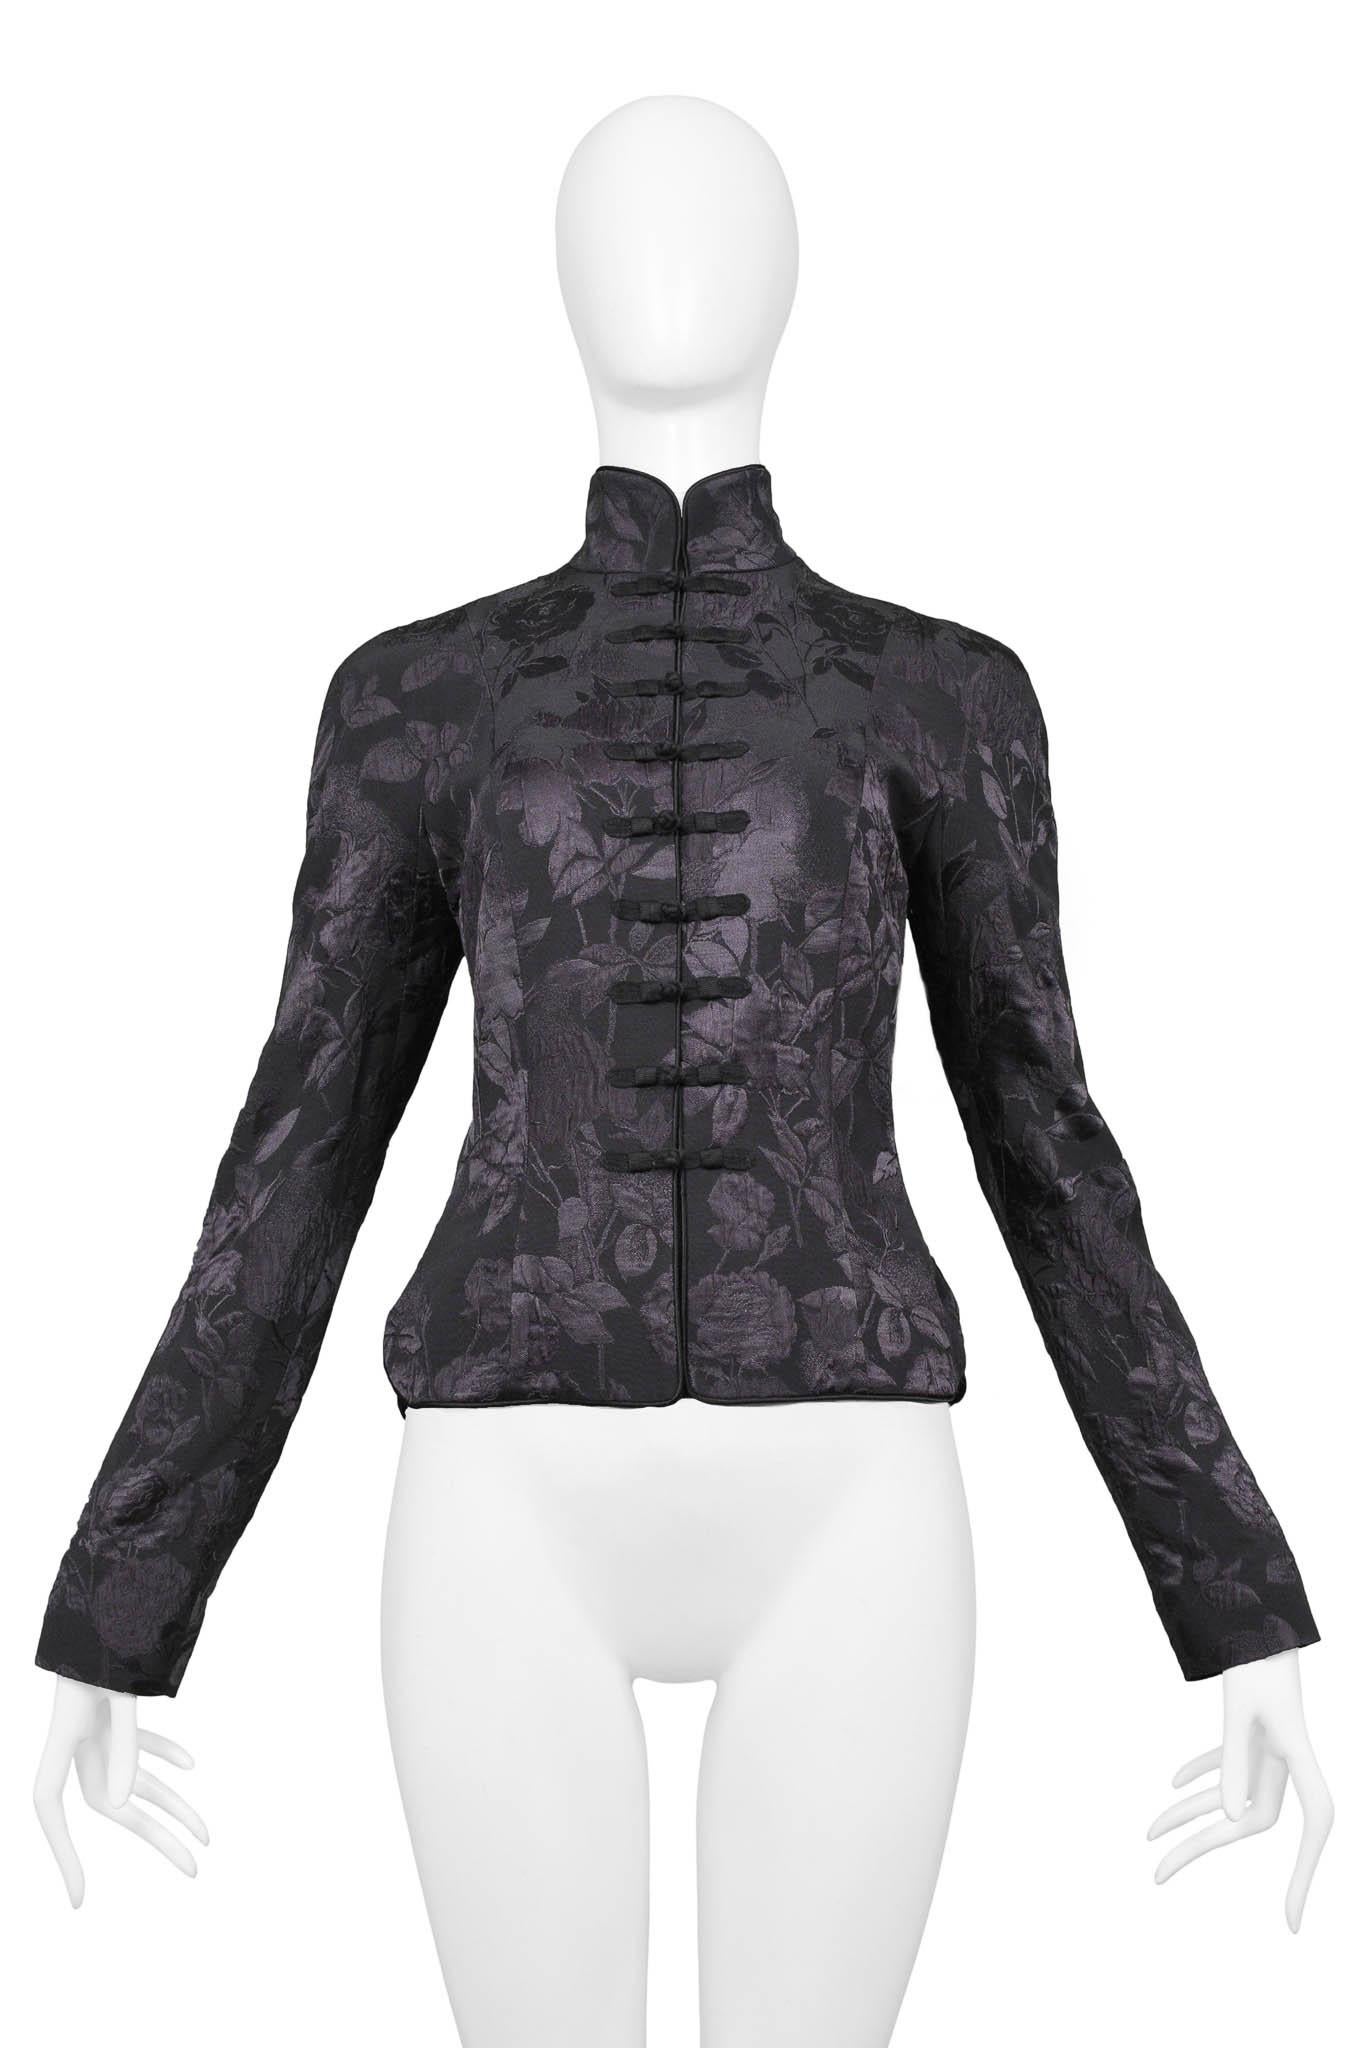 Resurrection is excited to offer a vintage Christian Dior by John Galliano dark purple cheongsam jacket featuring floral patterned silk, a mandarin collar, and front toggle fasteners as the closures. 

Christian Dior Paris
Designed by John